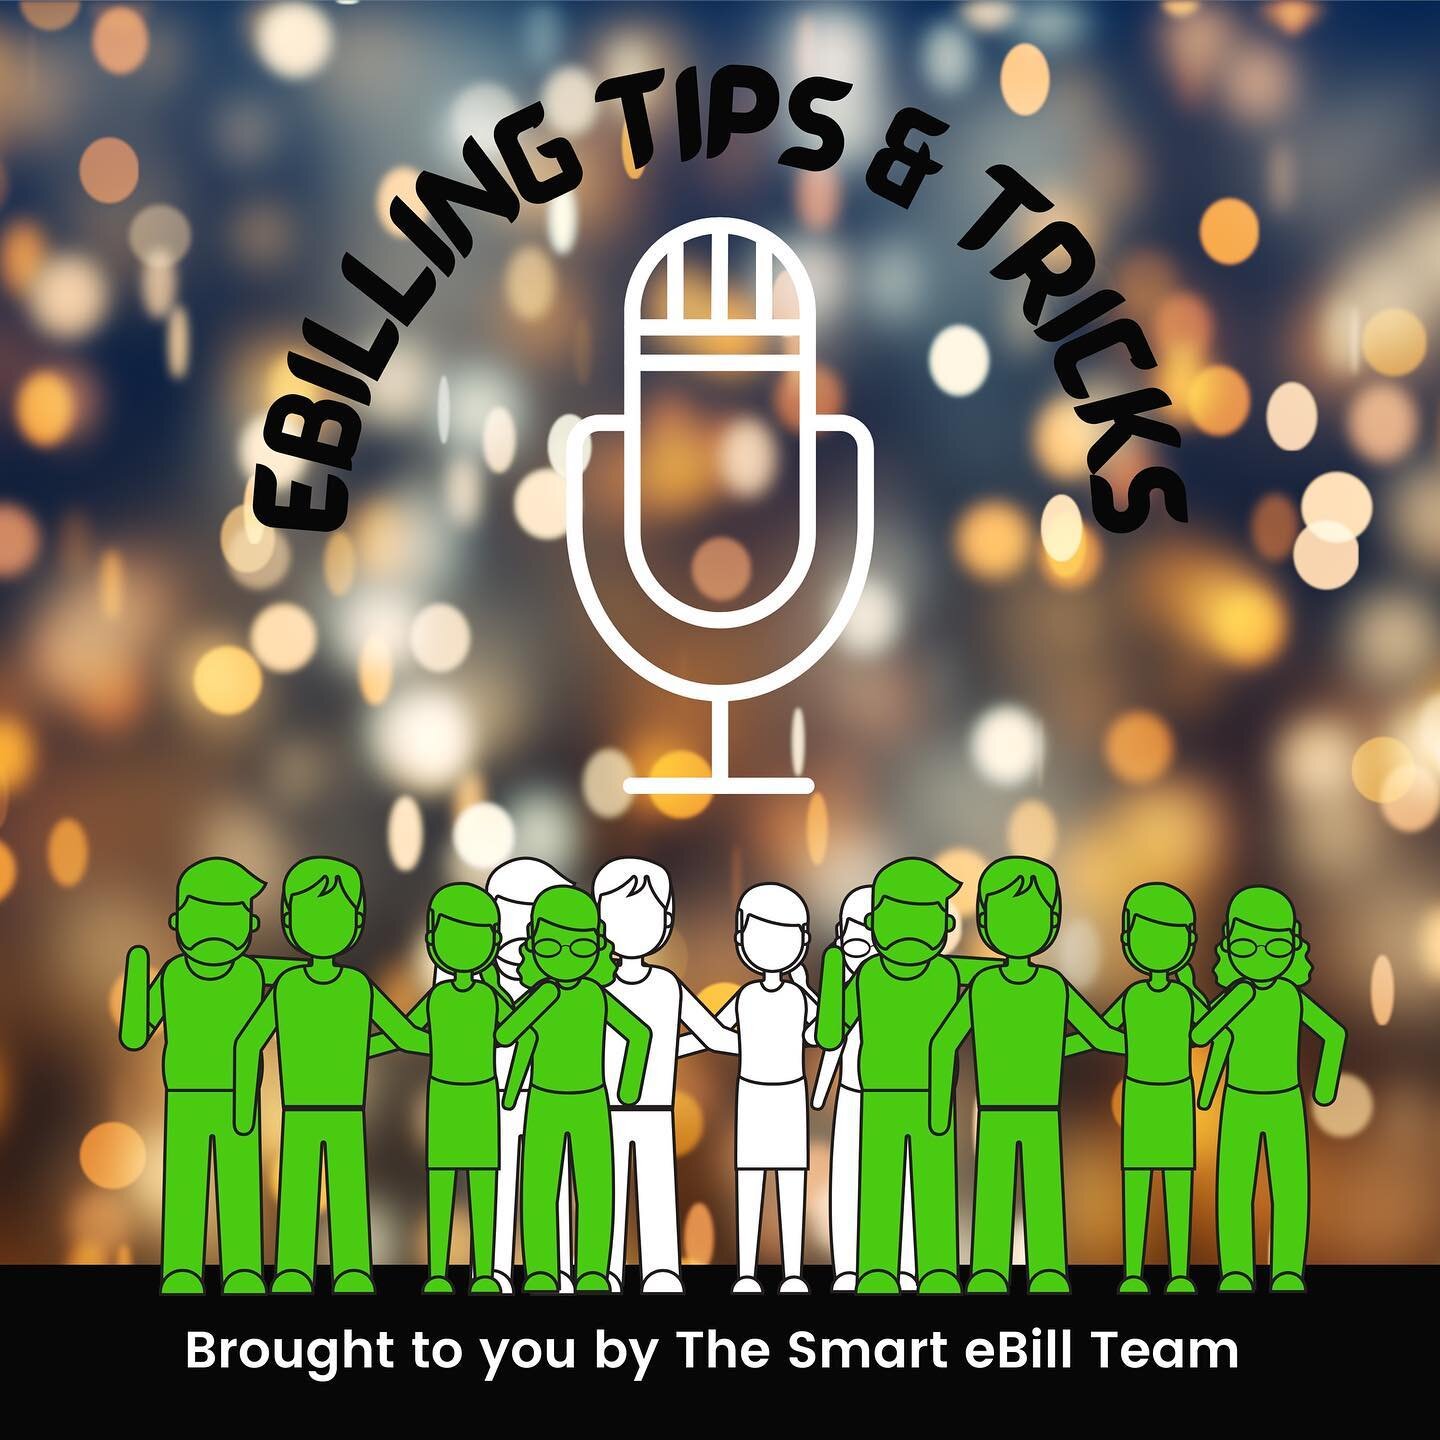 Ebilling Tips and Tricks - the podcast coming soon!